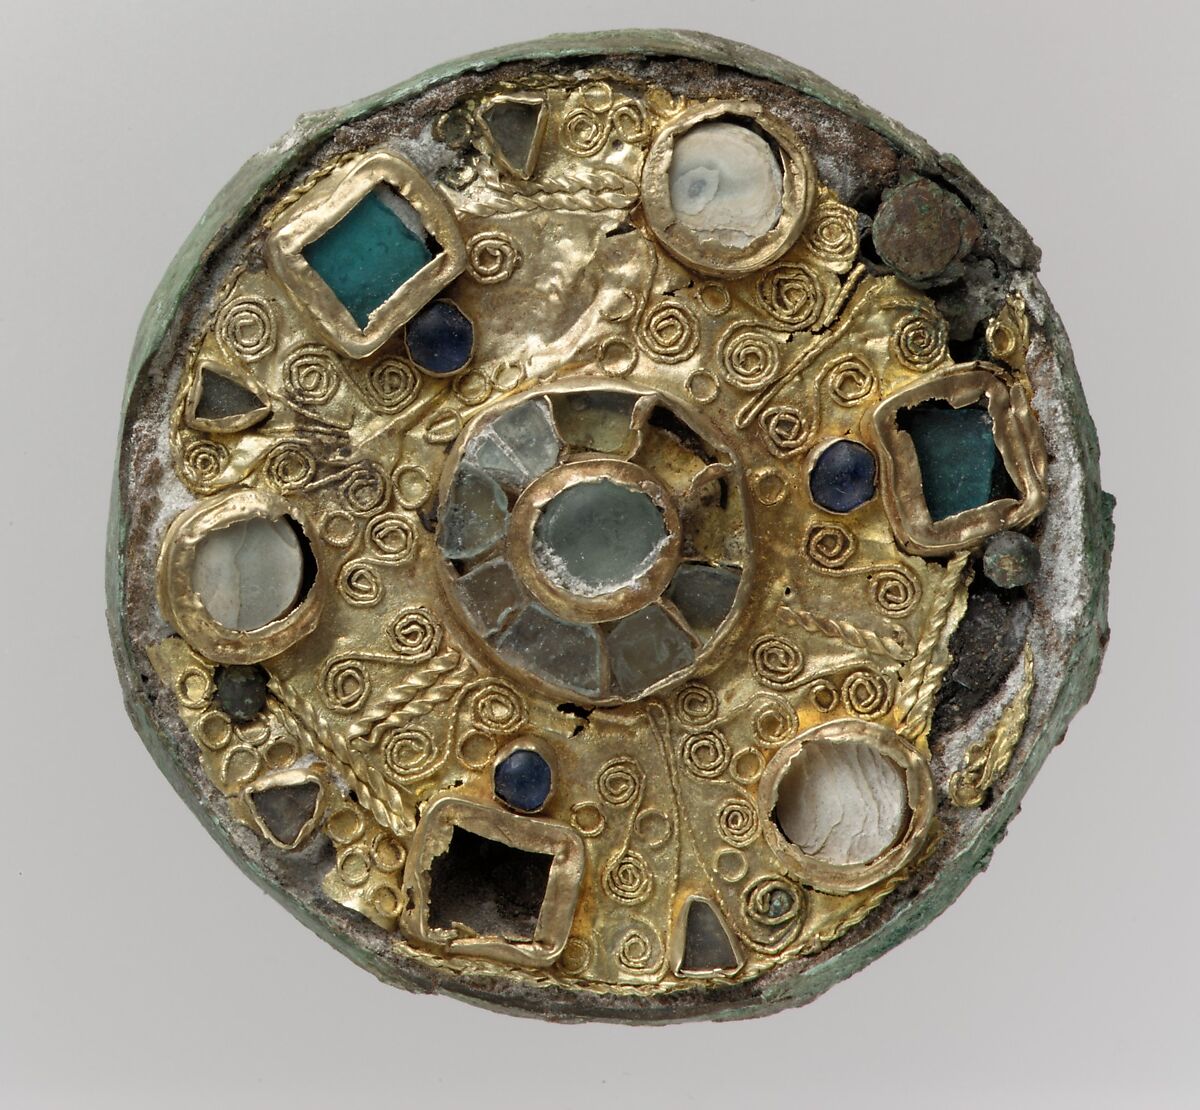 Disk Brooch, Gold, glass, mother-of-pearl, copper alloy, Frankish 